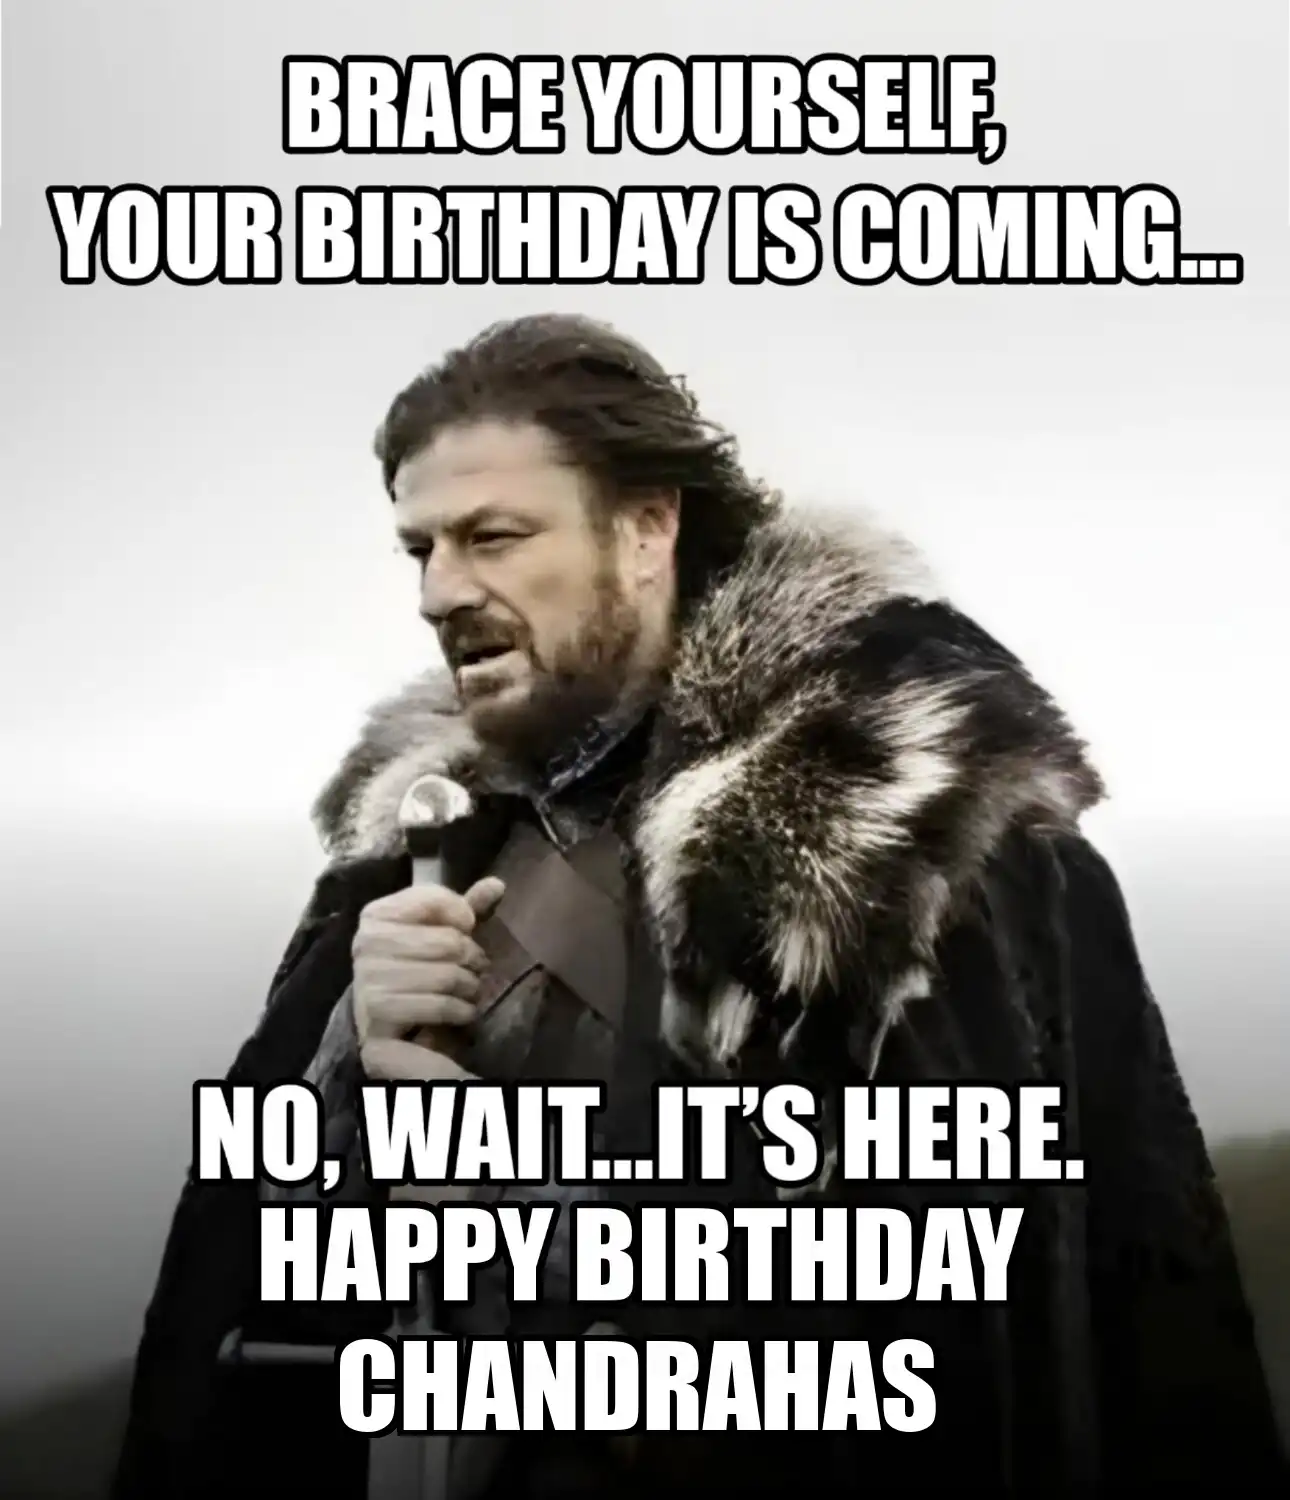 Happy Birthday Chandrahas Brace Yourself Your Birthday Is Coming Meme